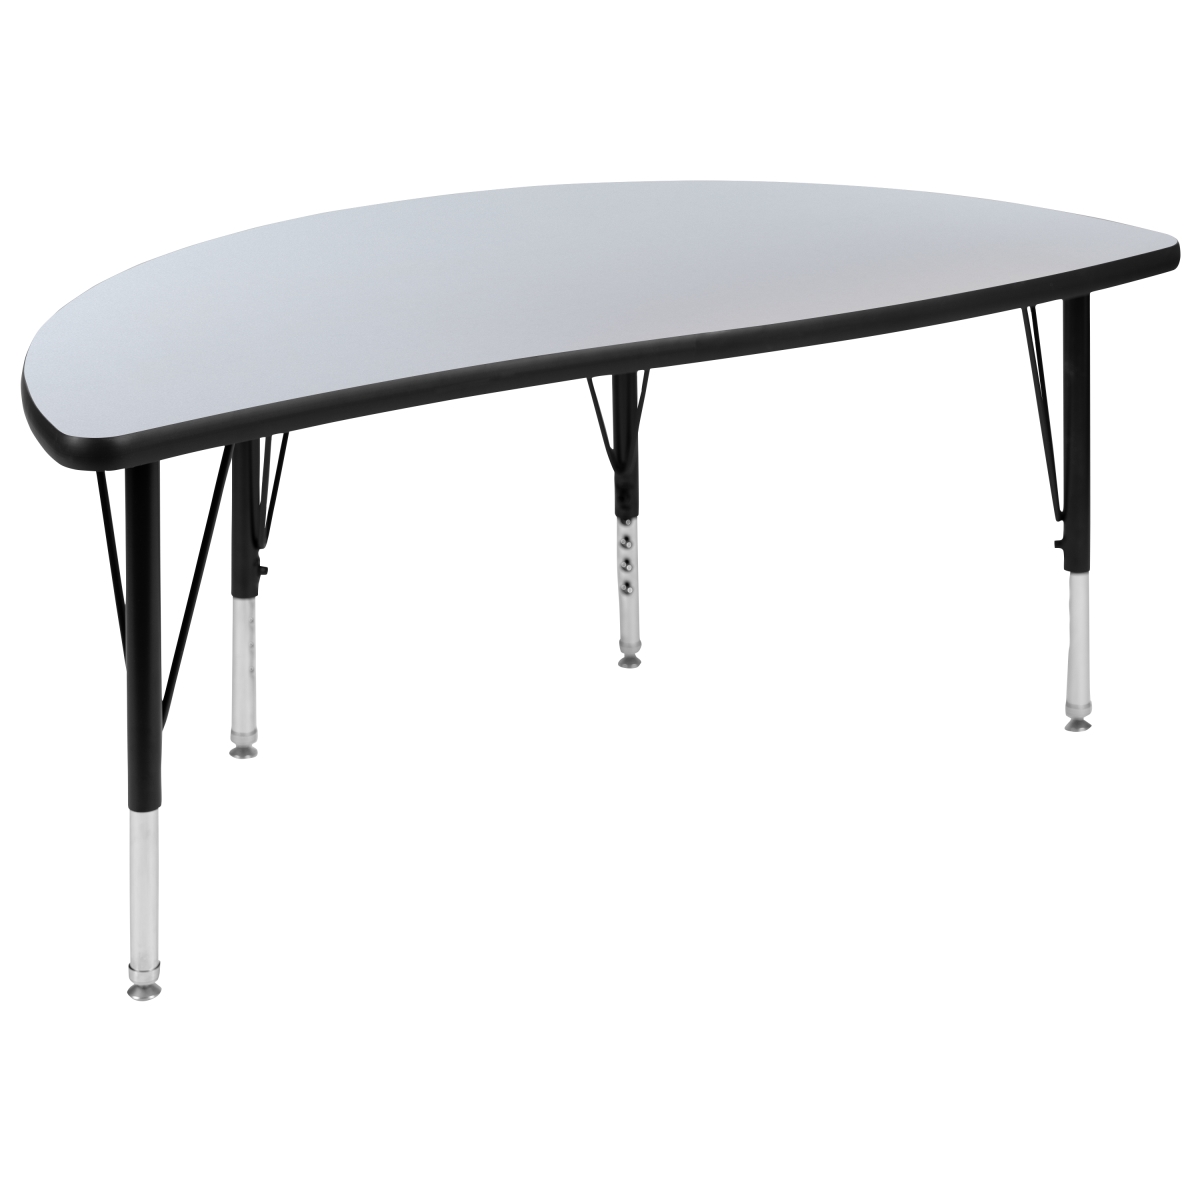 Picture of Flash Furniture XU-A48-HCIRC-GY-T-P-GG 47.5 in. Half Circle Wave Flexible Collaborative Grey Thermal Laminate Activity Table - Height Adjustable Short Legs